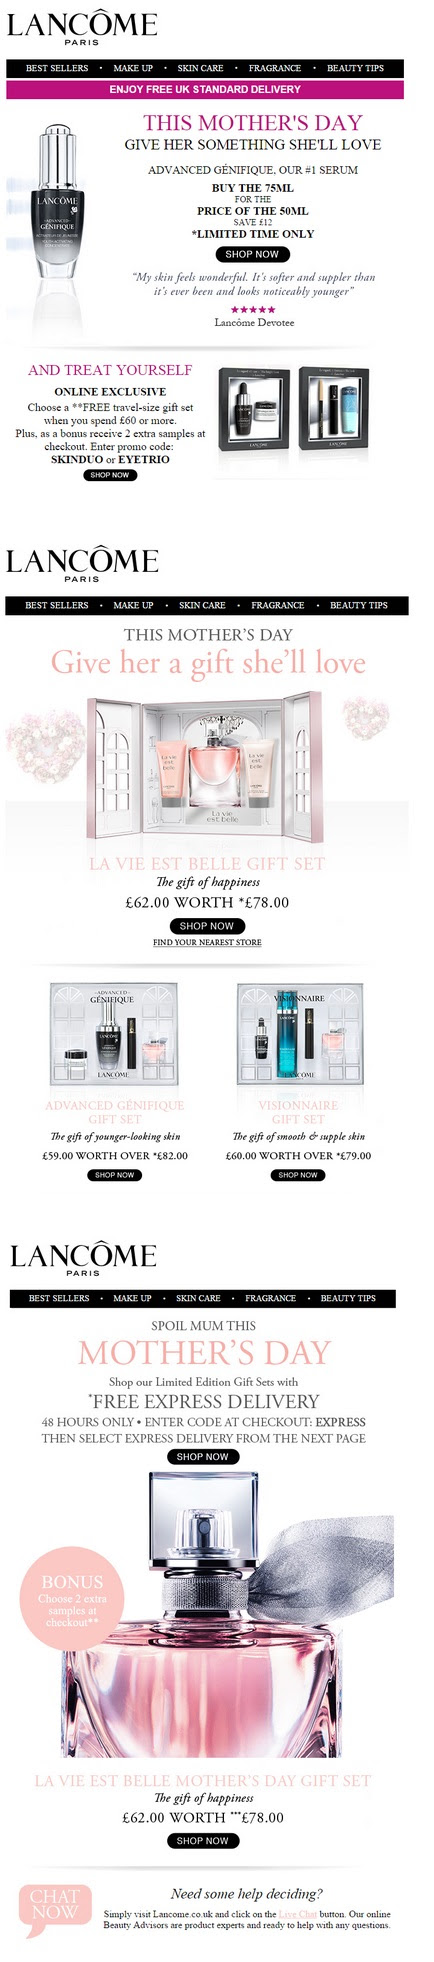 lancomedrip_email_campaign